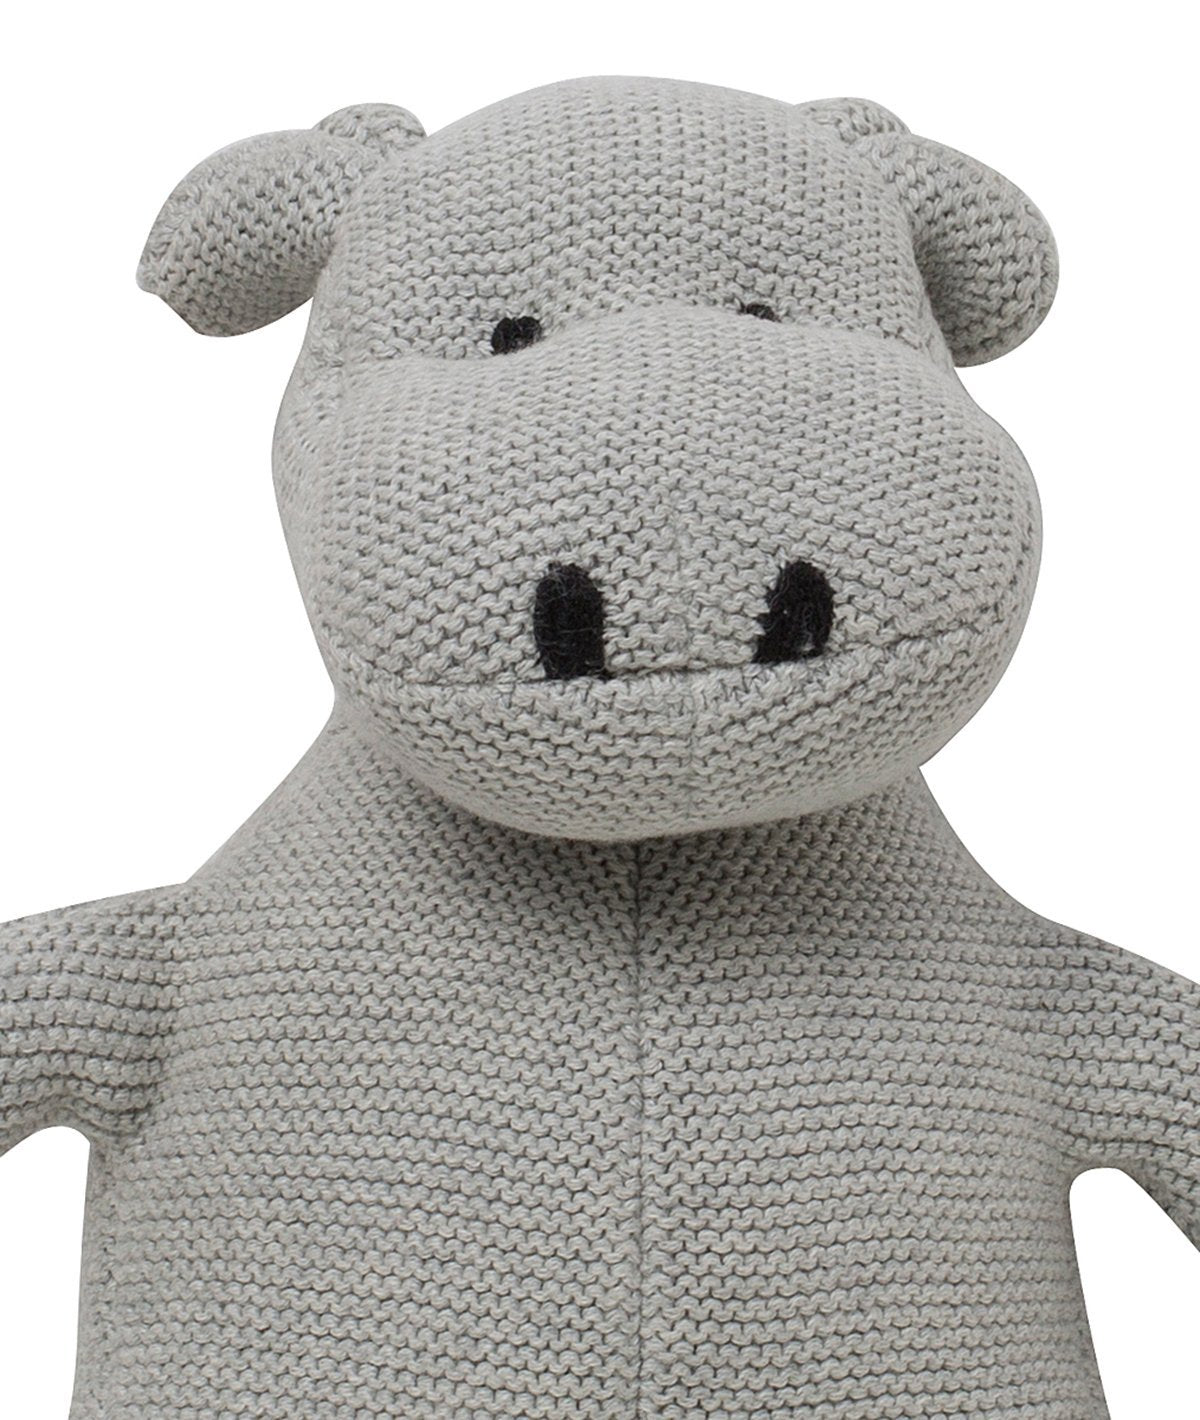 Baby Hippo - Vanilla Grey 100% Cotton Knitted Stuffed Soft Toy for Babies / Kids